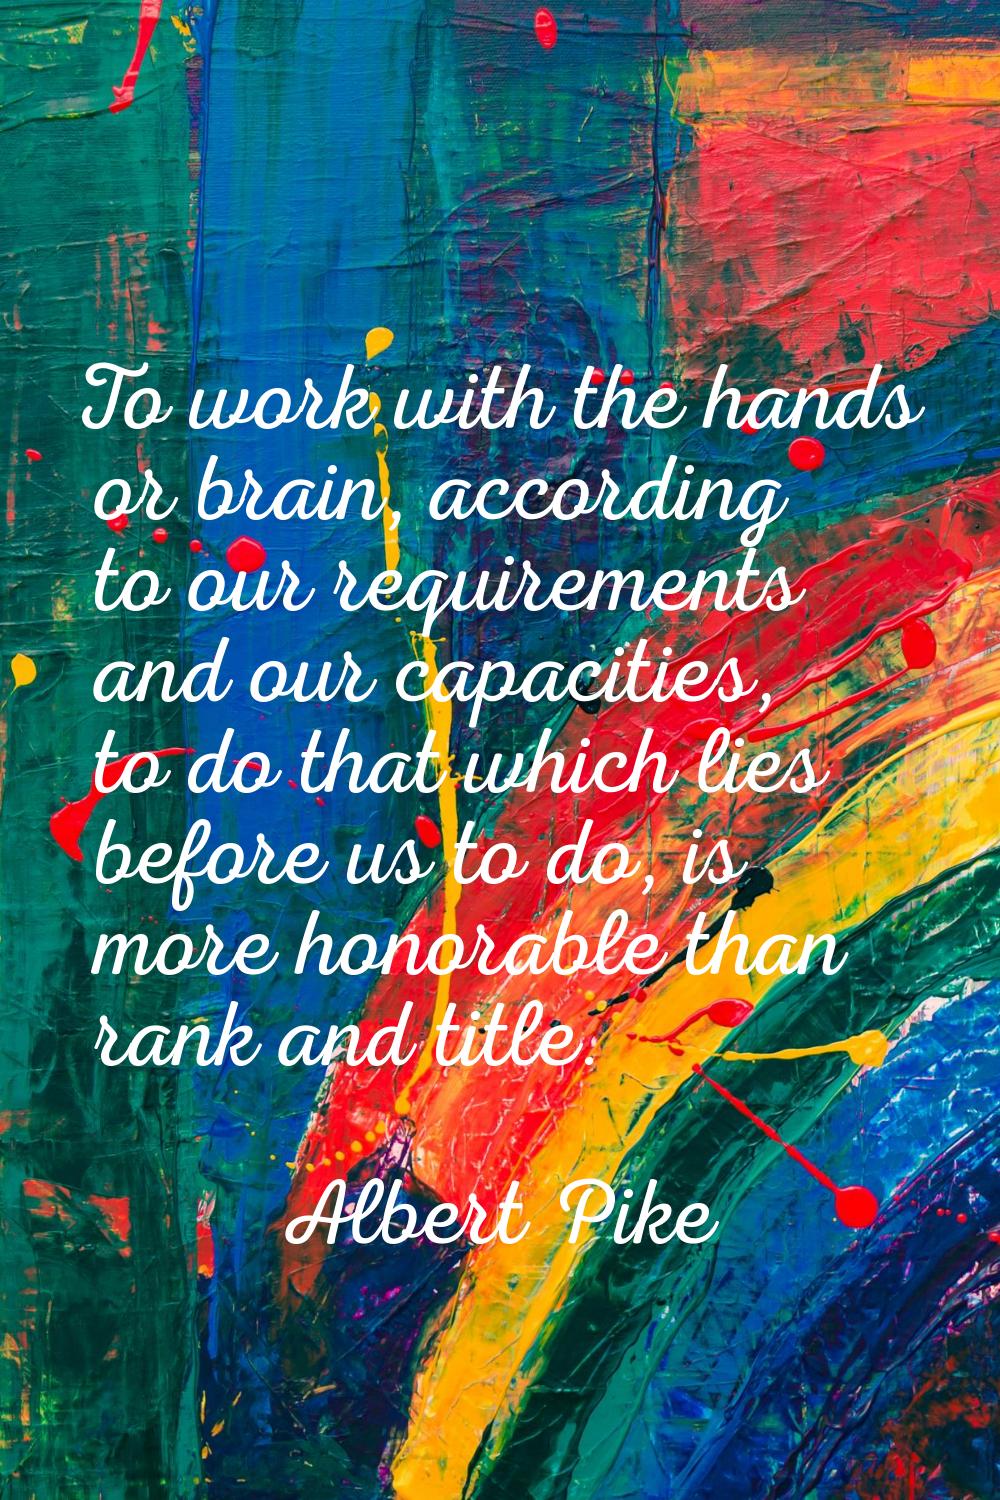 To work with the hands or brain, according to our requirements and our capacities, to do that which